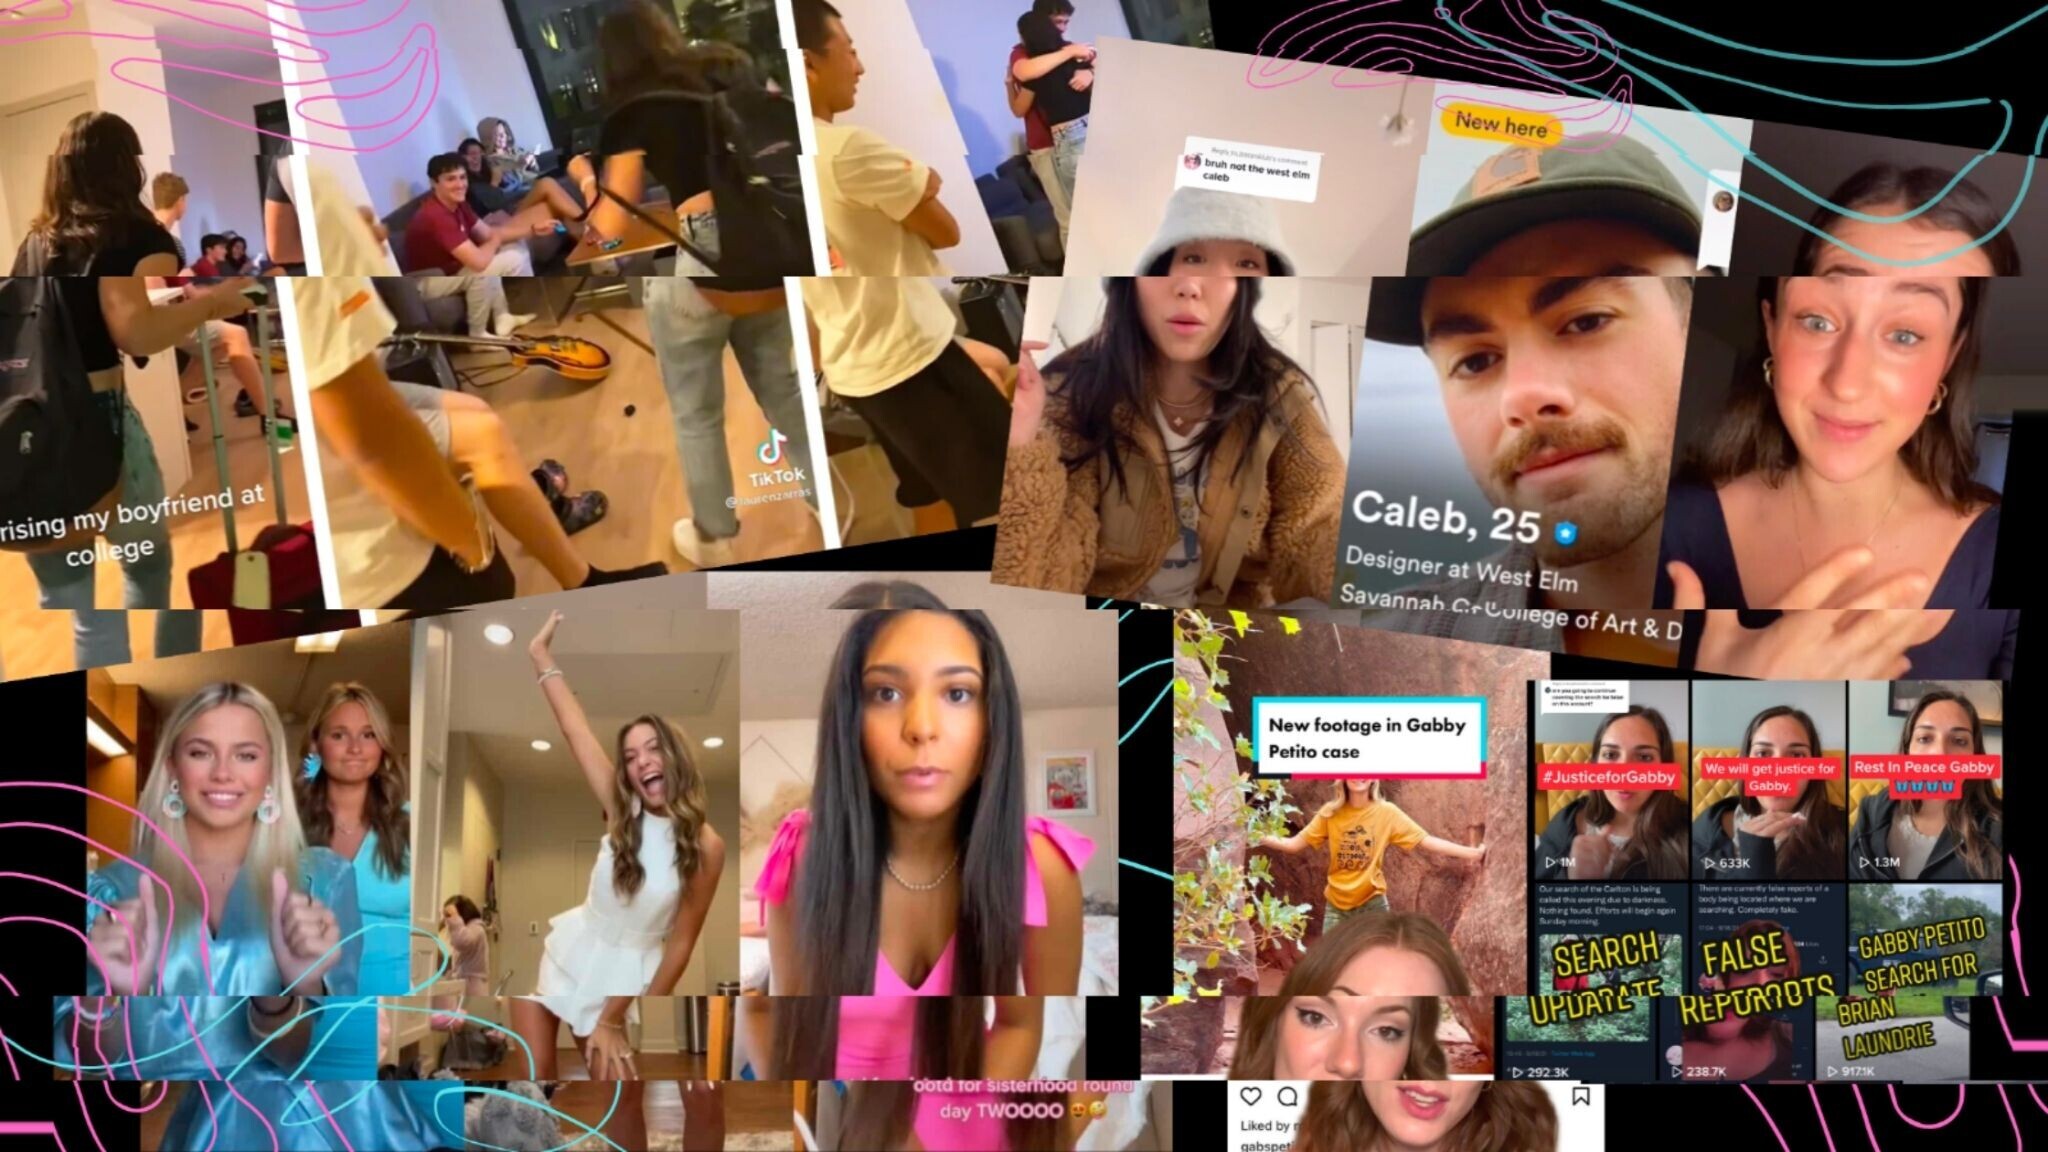 From Couch Guy to West Elm Caleb: How TikTok replaced modern-day tabloids